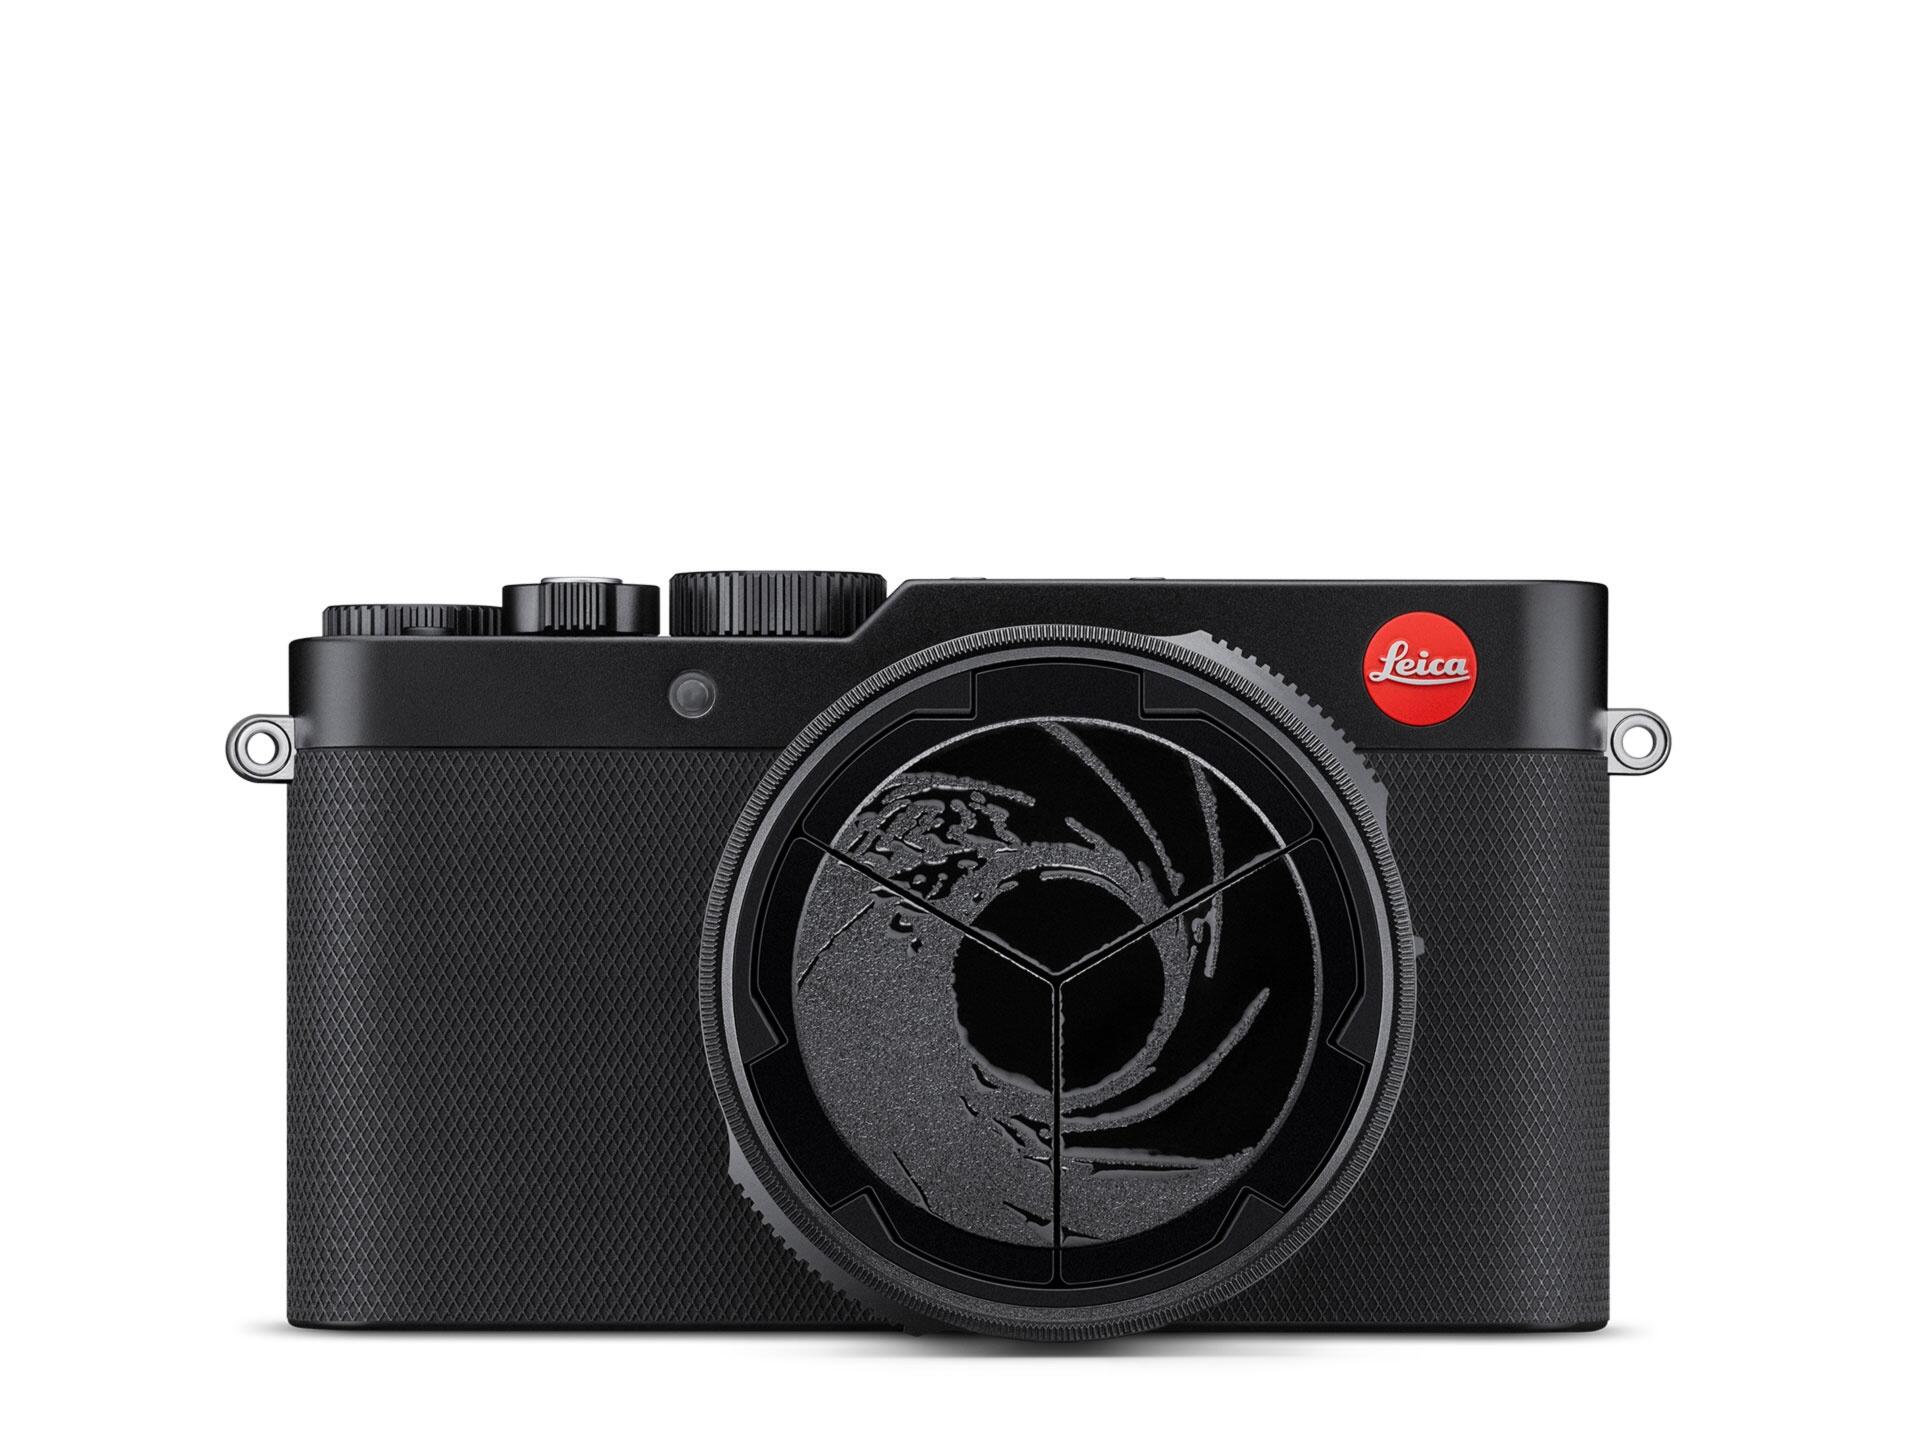 Leica Introduces D-Lux 7 007 Edition Camera; Priced At RM 9,585 